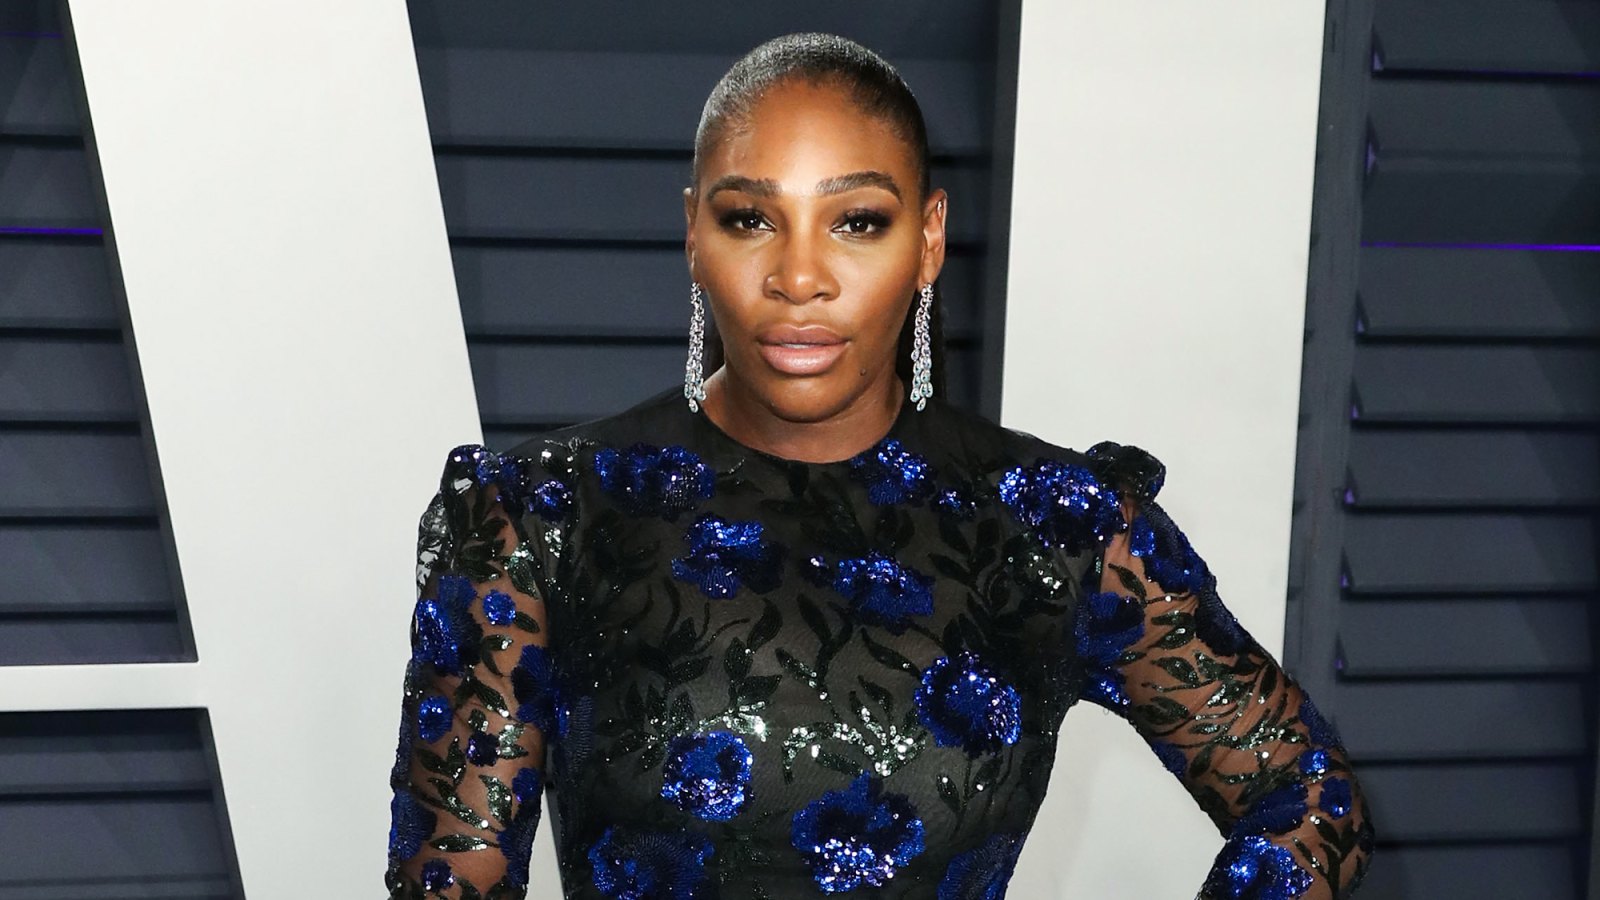 Serena Williams Graces the Cover of Vogue's September Issue With Daughter Olympia